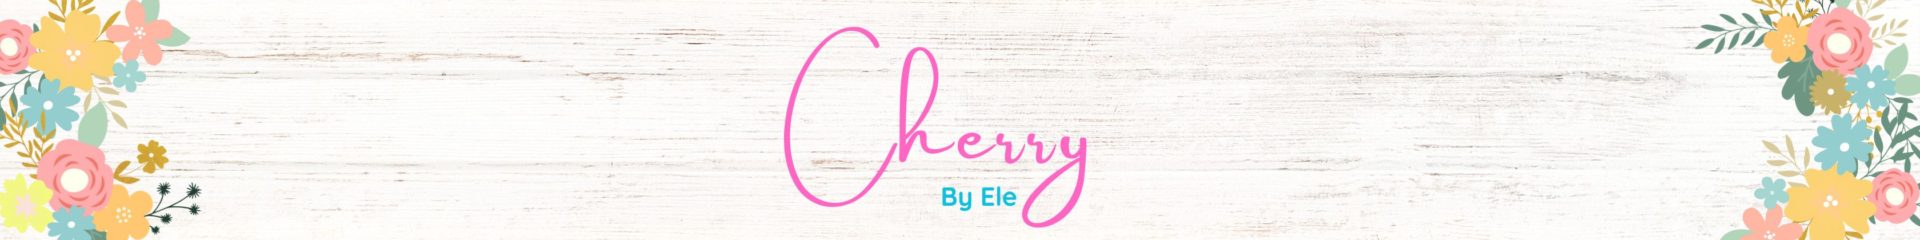 Cherry by Ele  home banner